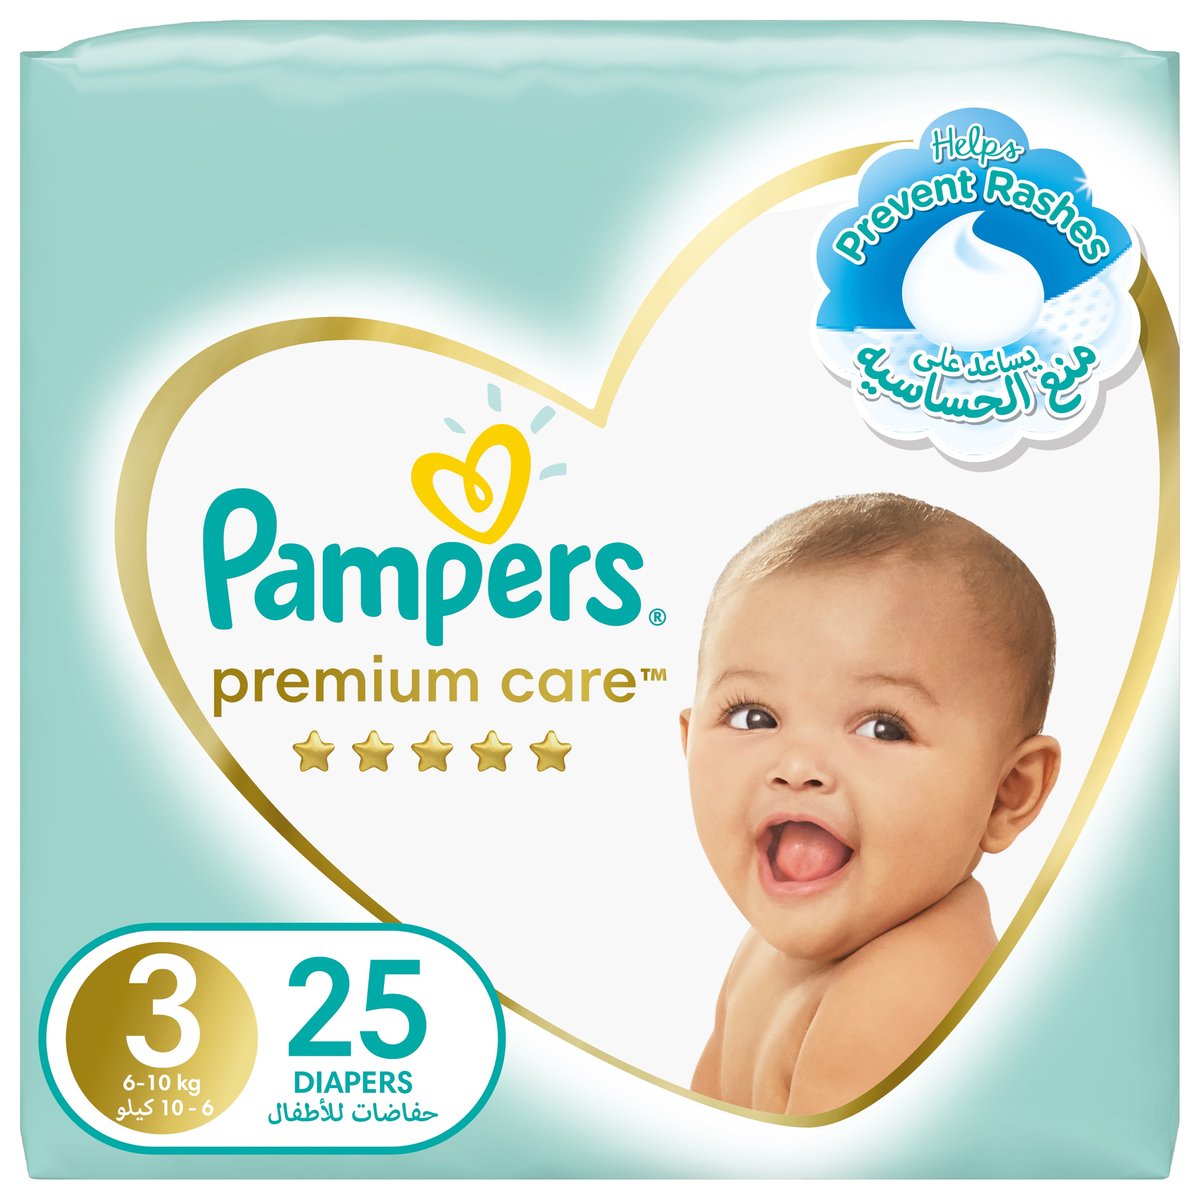 Pampers Premium Care Diapers Size 3, 6-10kg The Softest Diaper 25pcs